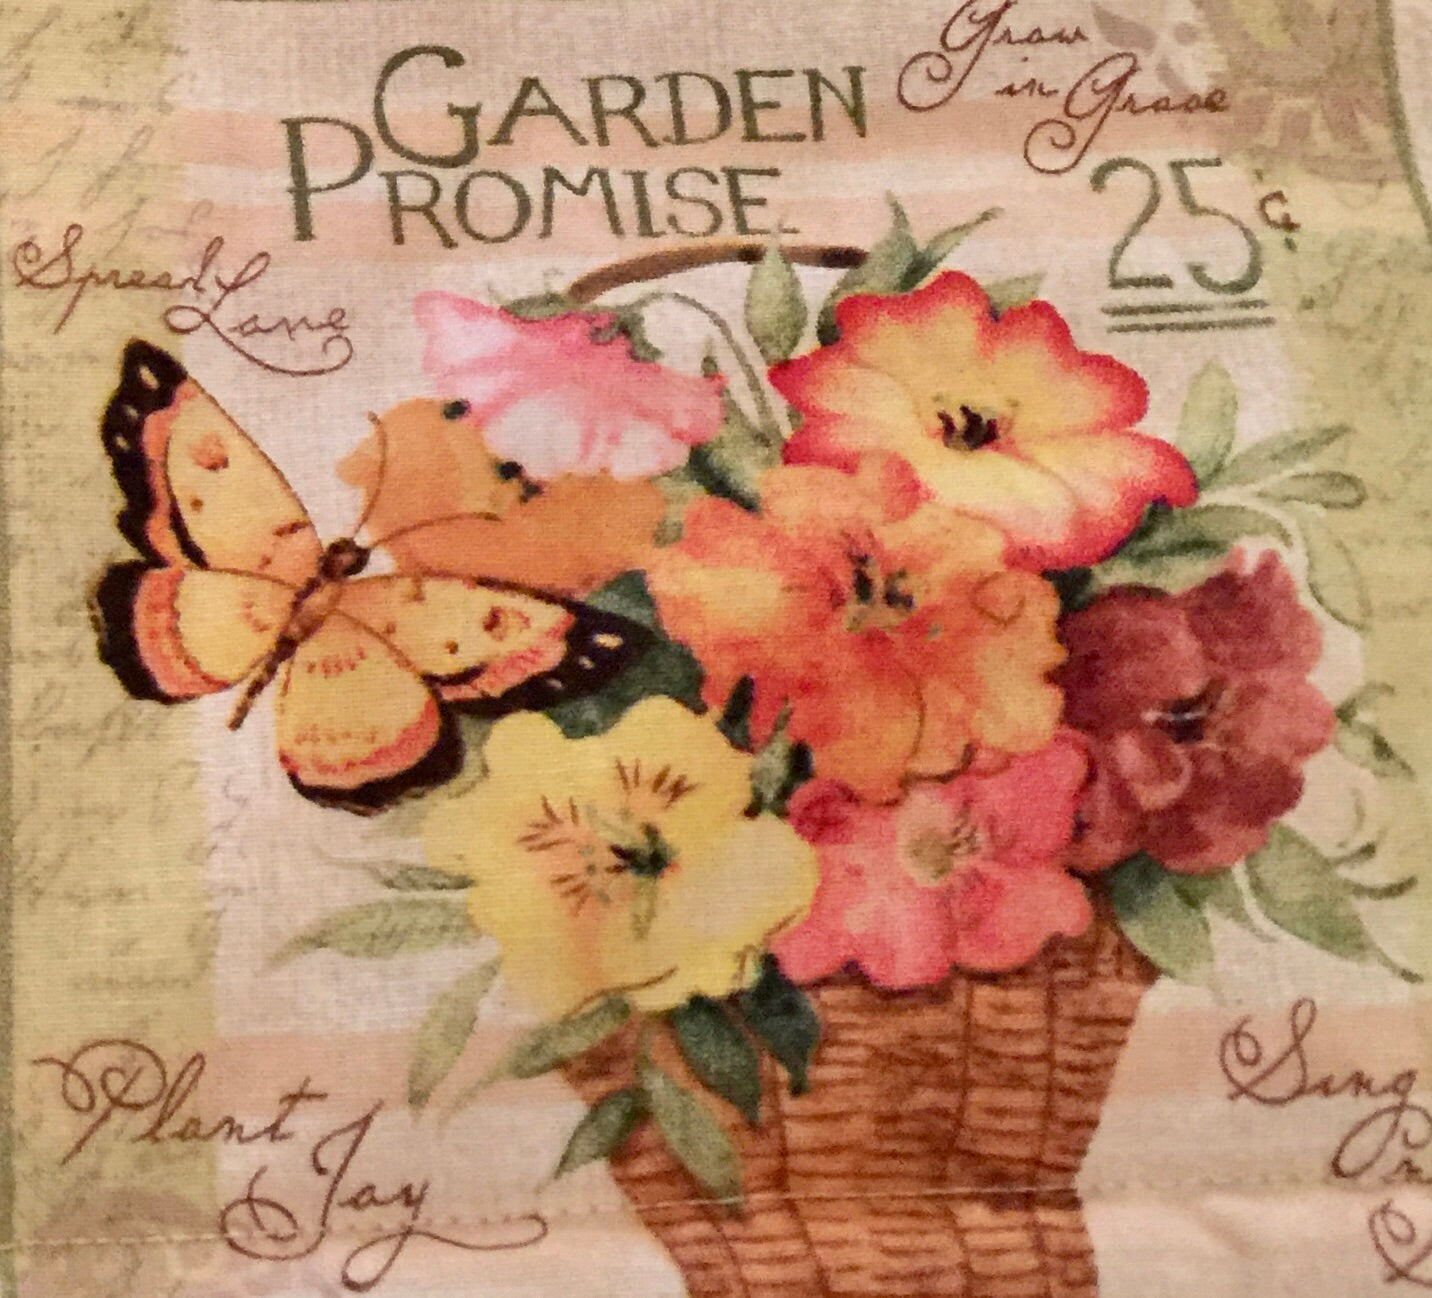 The most beautiful flower garden blanket and reversible